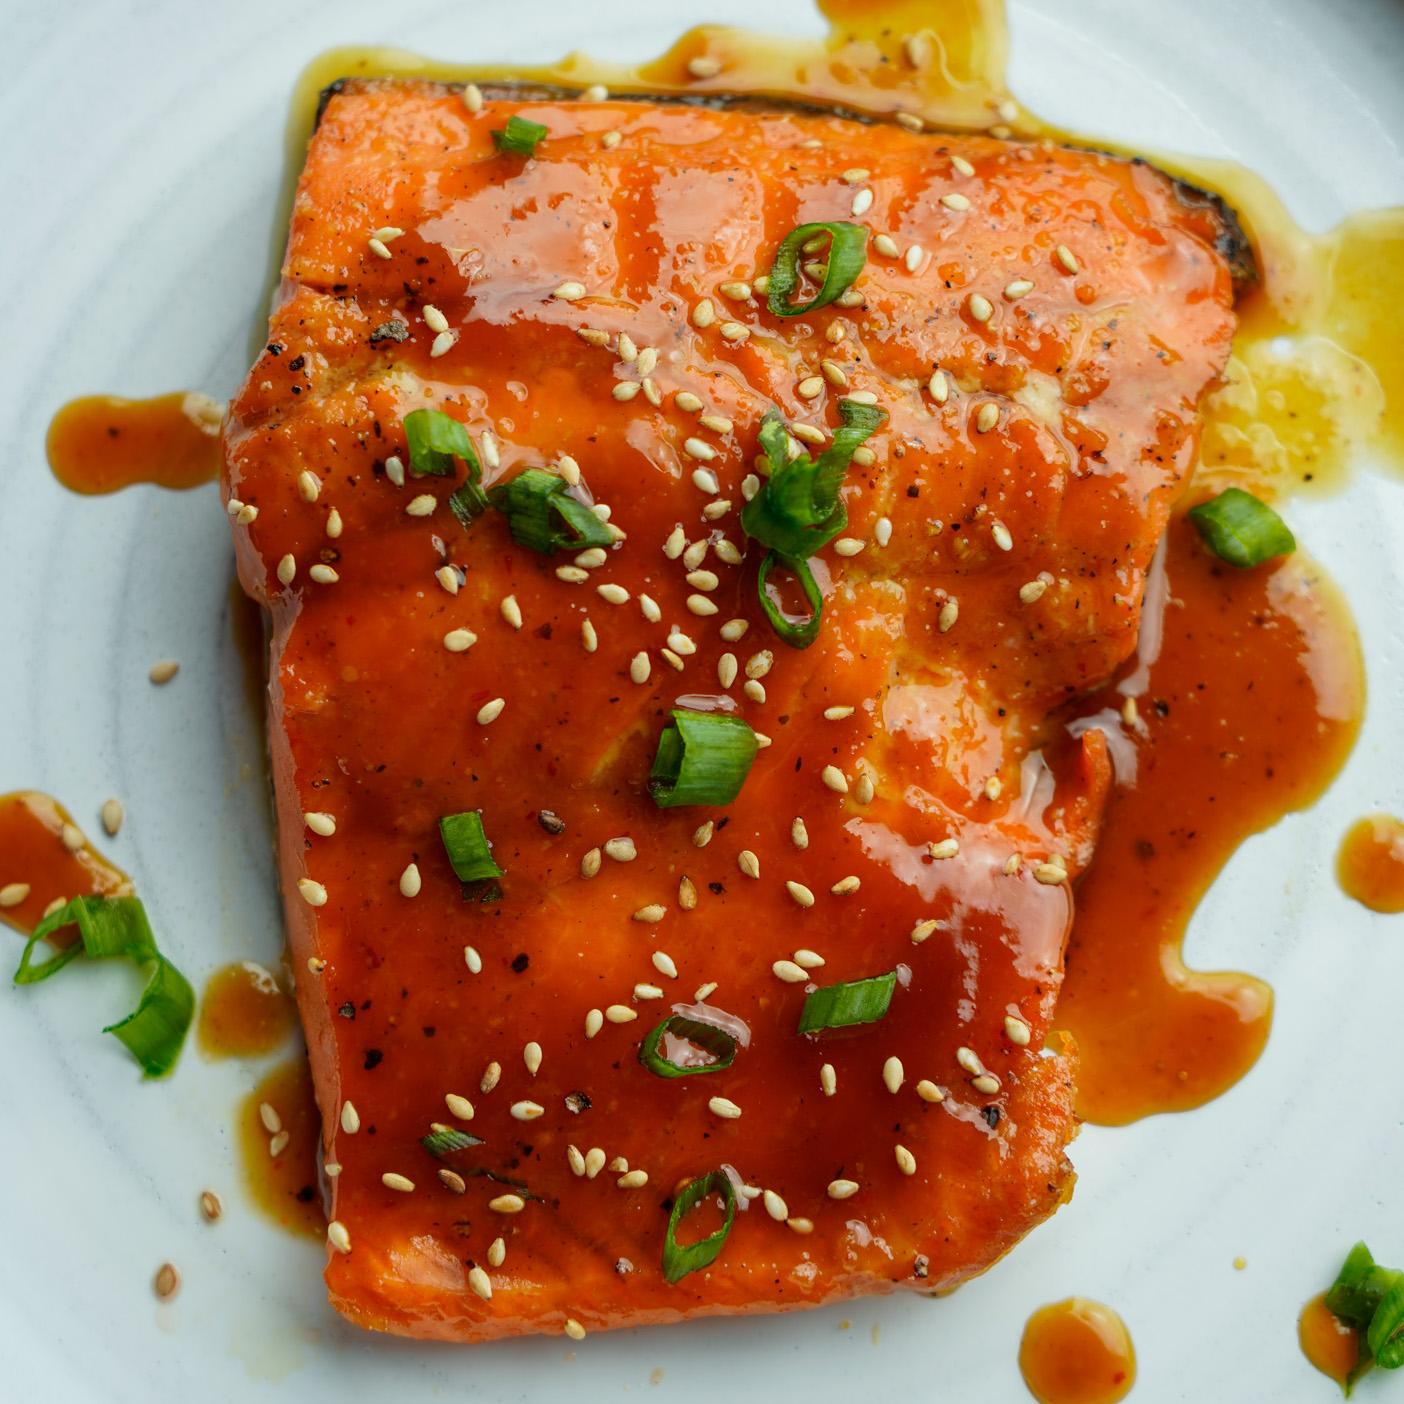 Salmon Filet with Glaze on a white plate